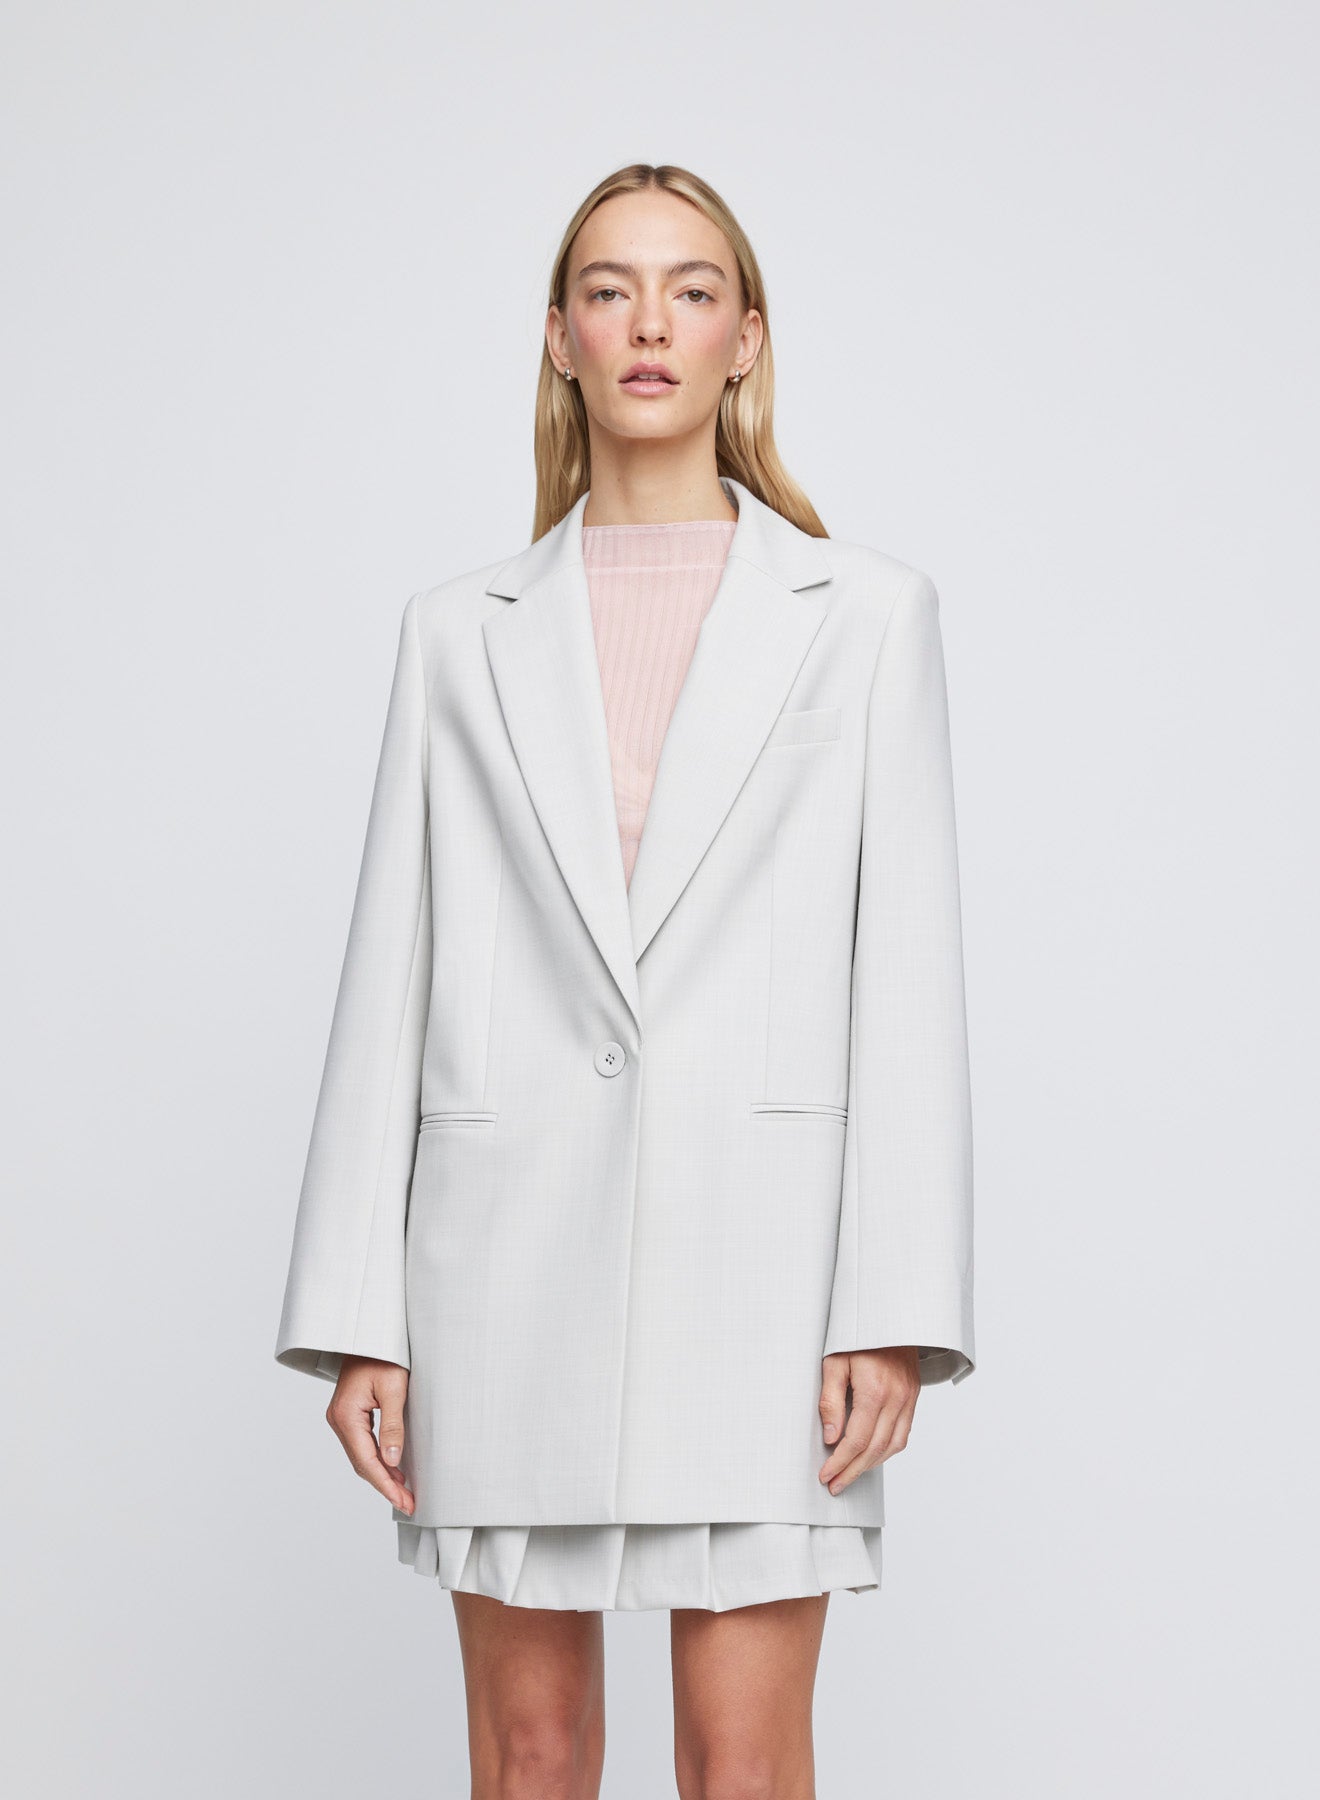 The ANNA QUAN Harper Blazer in Heather is a relaxed fit longline blazer. Designed with a notch collar, single welt breast pocket and full lining for a premium outerwear piece.